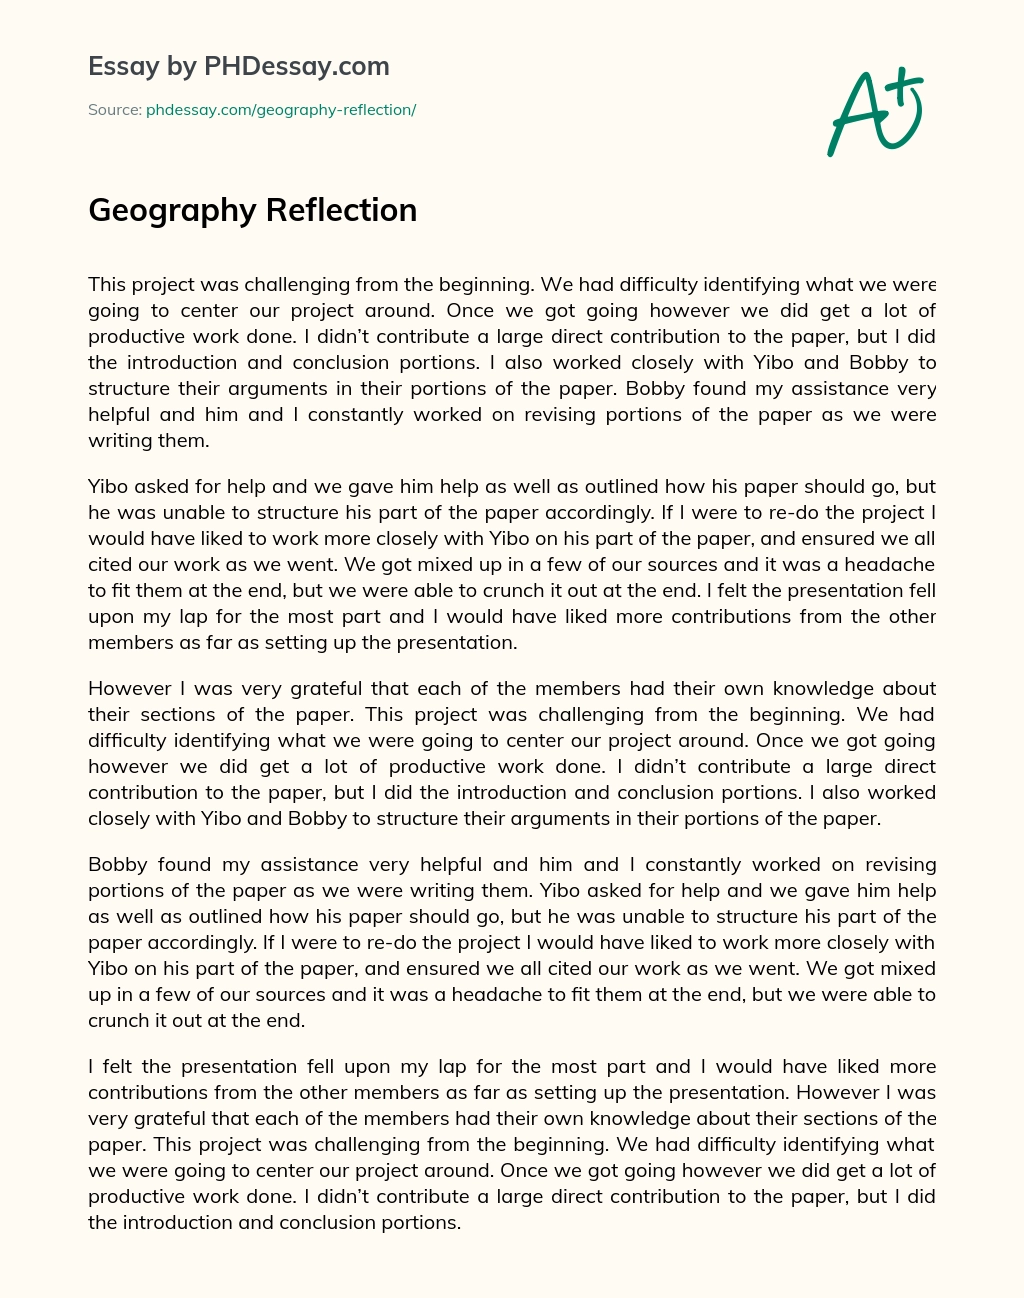 Geography Reflection essay